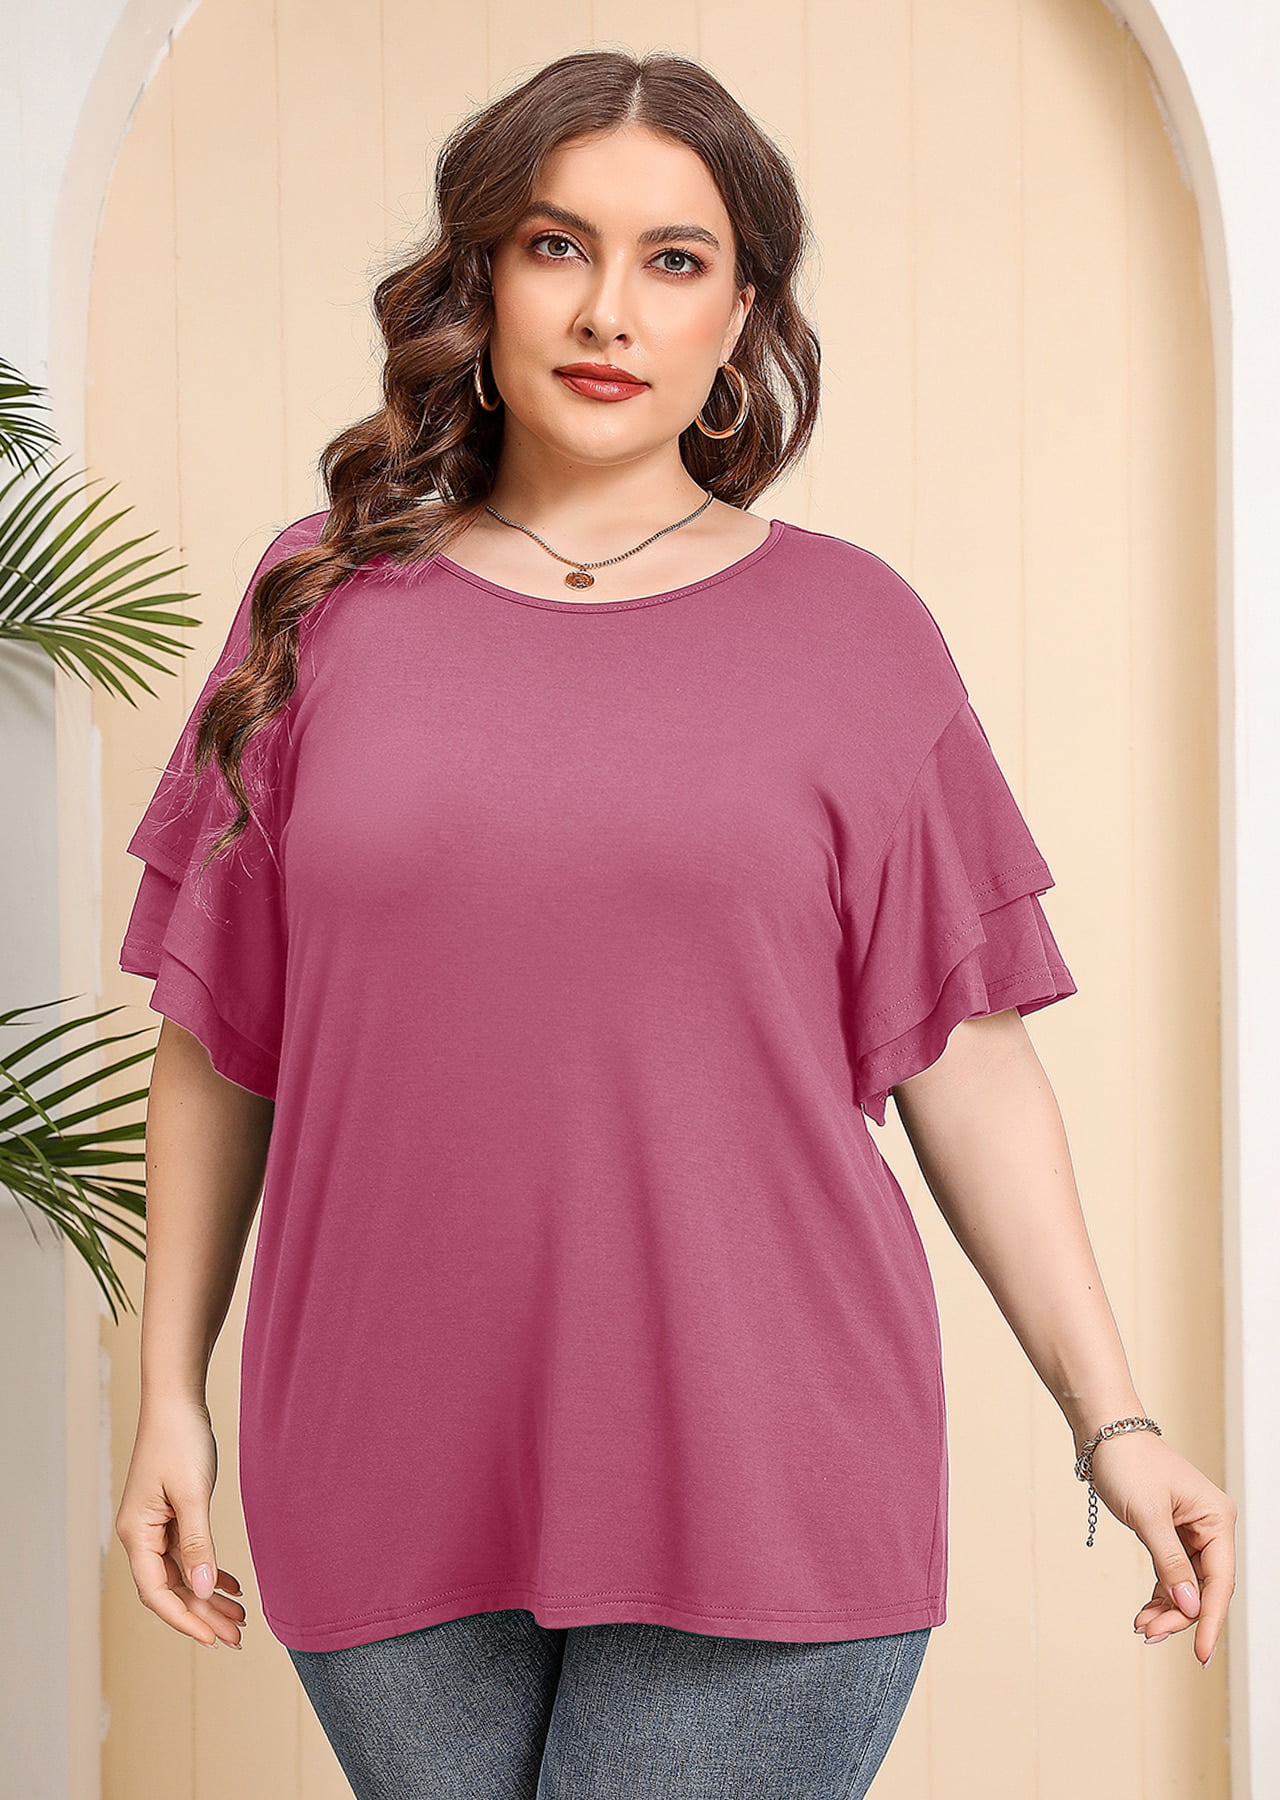 SHOWMALL Plus Size Clothes for Women Double Ruffle Short Sleeve